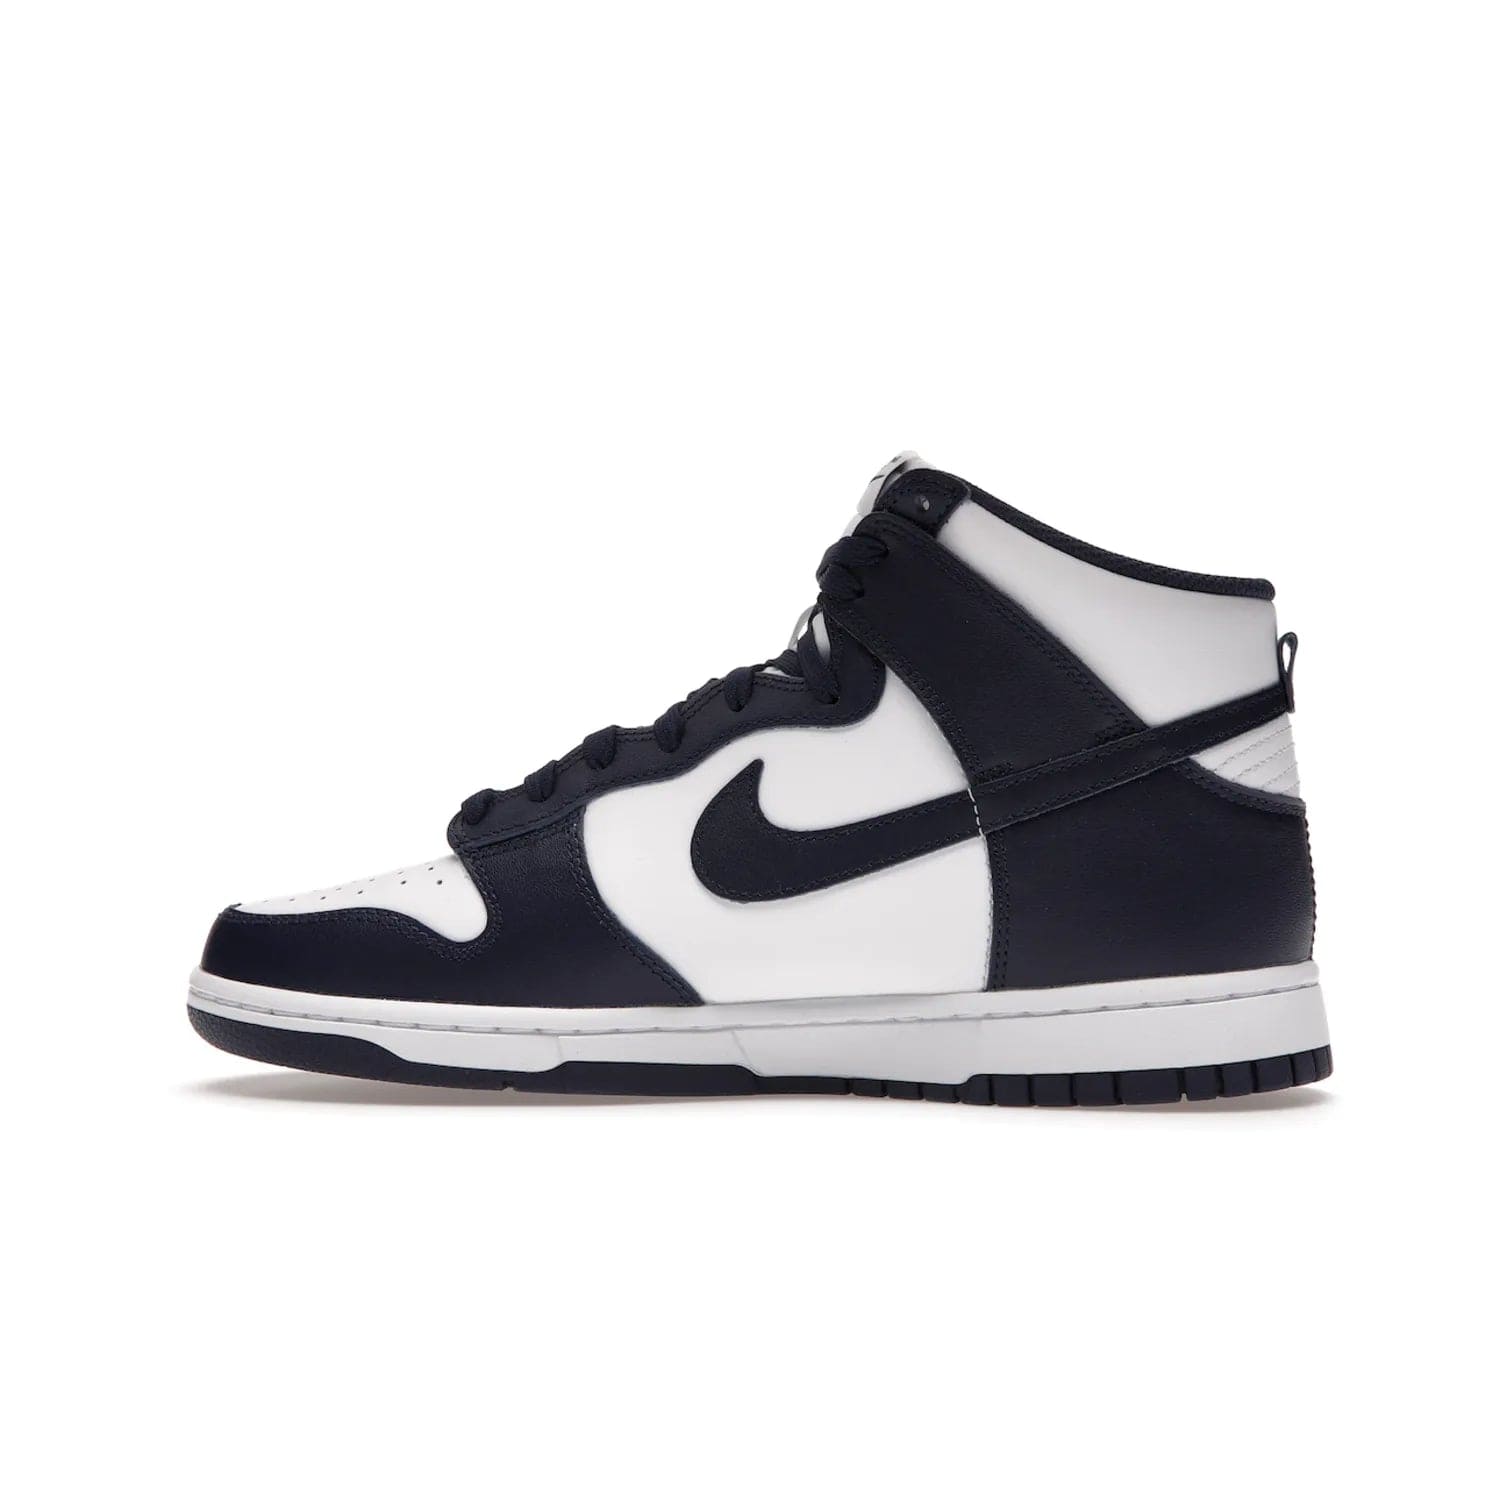 Nike Dunk High Championship Navy - Image 20 - Only at www.BallersClubKickz.com - Classic athletic style meets striking color-blocking on the Nike Dunk High Championship Navy. A white leather upper with Championship Navy overlays creates a retro look with a woven tongue label and sole. Unleash your inner champion with the Nike Dunk High Championship Navy.